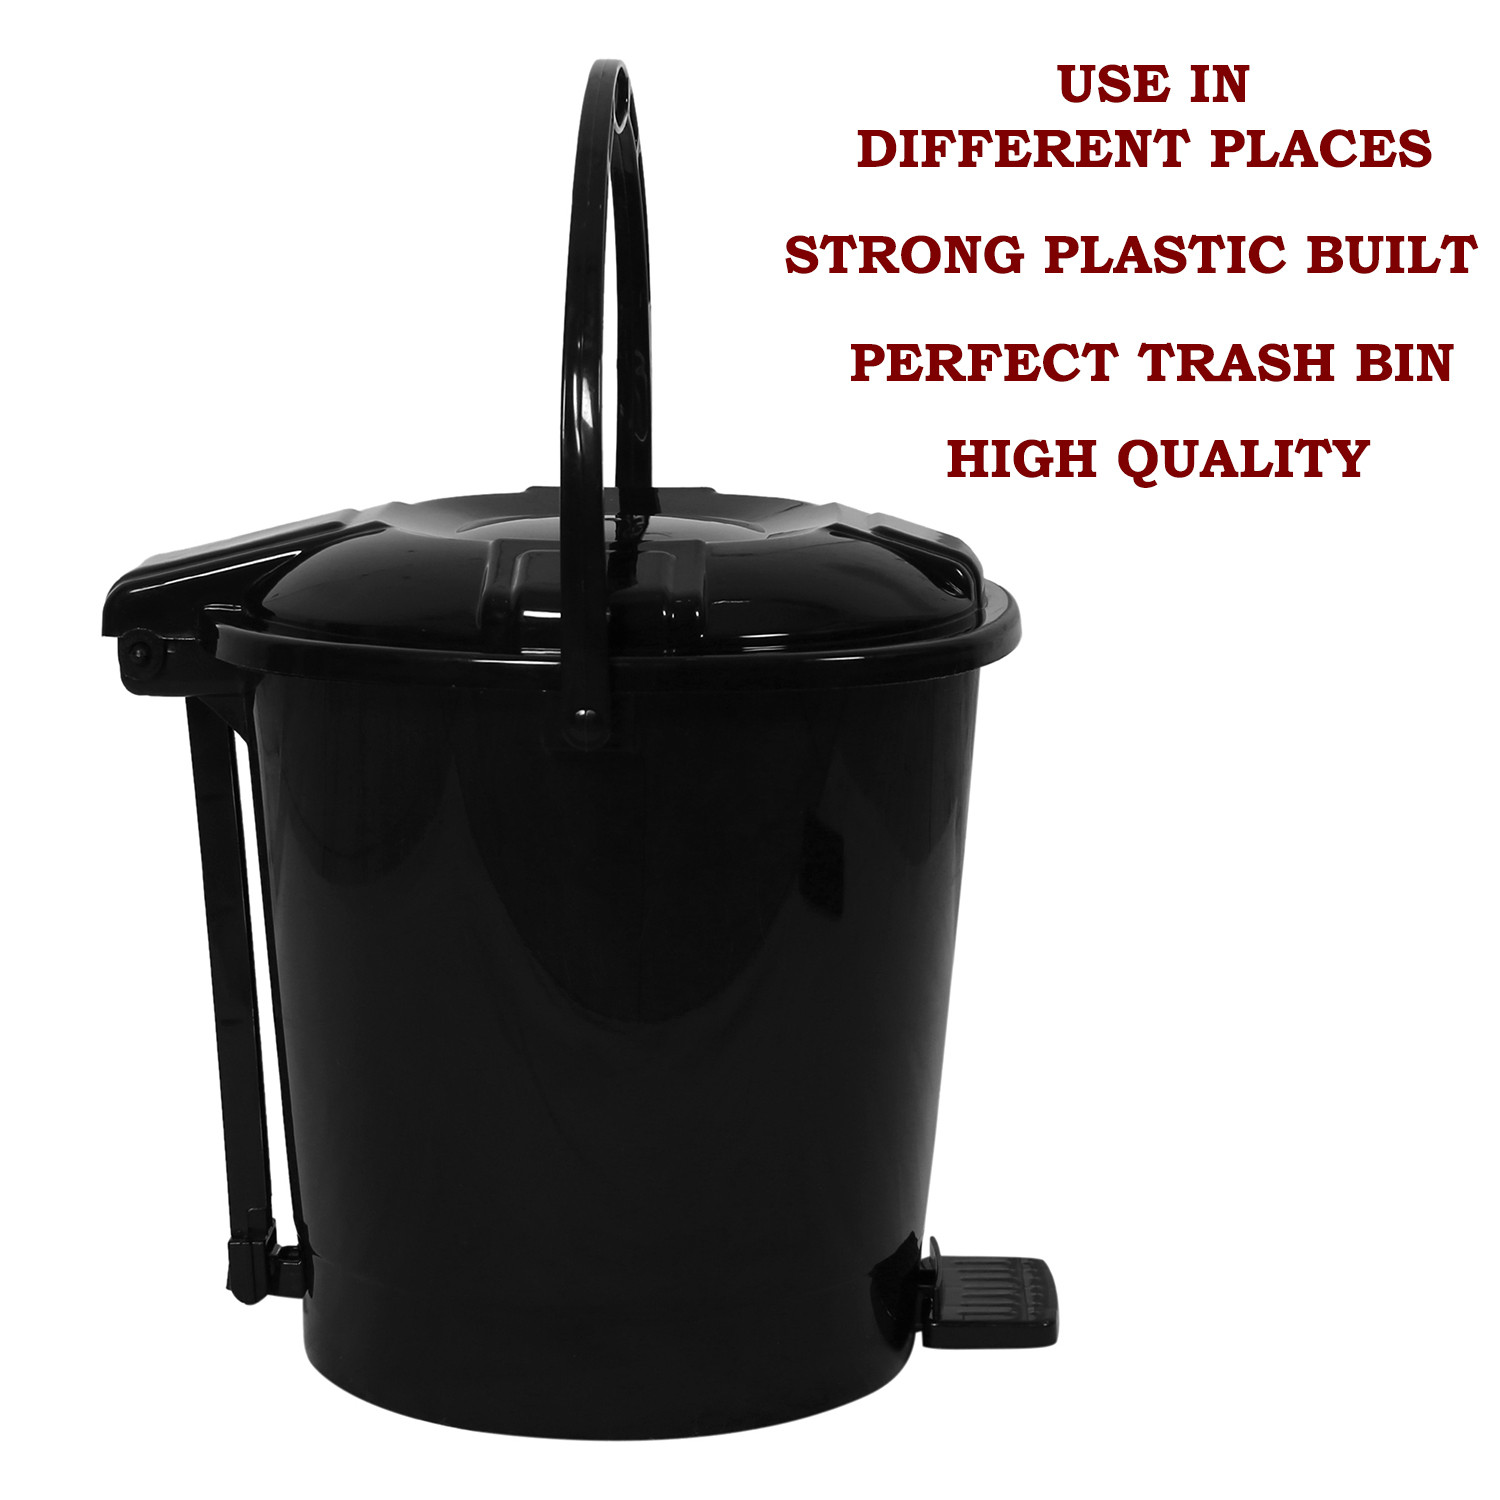 Kuber Industries Durable Plastic Pedal Dustbin|Waste Bin|Trash Can For Kitchen & Home With Handle,10 Litre,Pack of 2 (Black & Red)